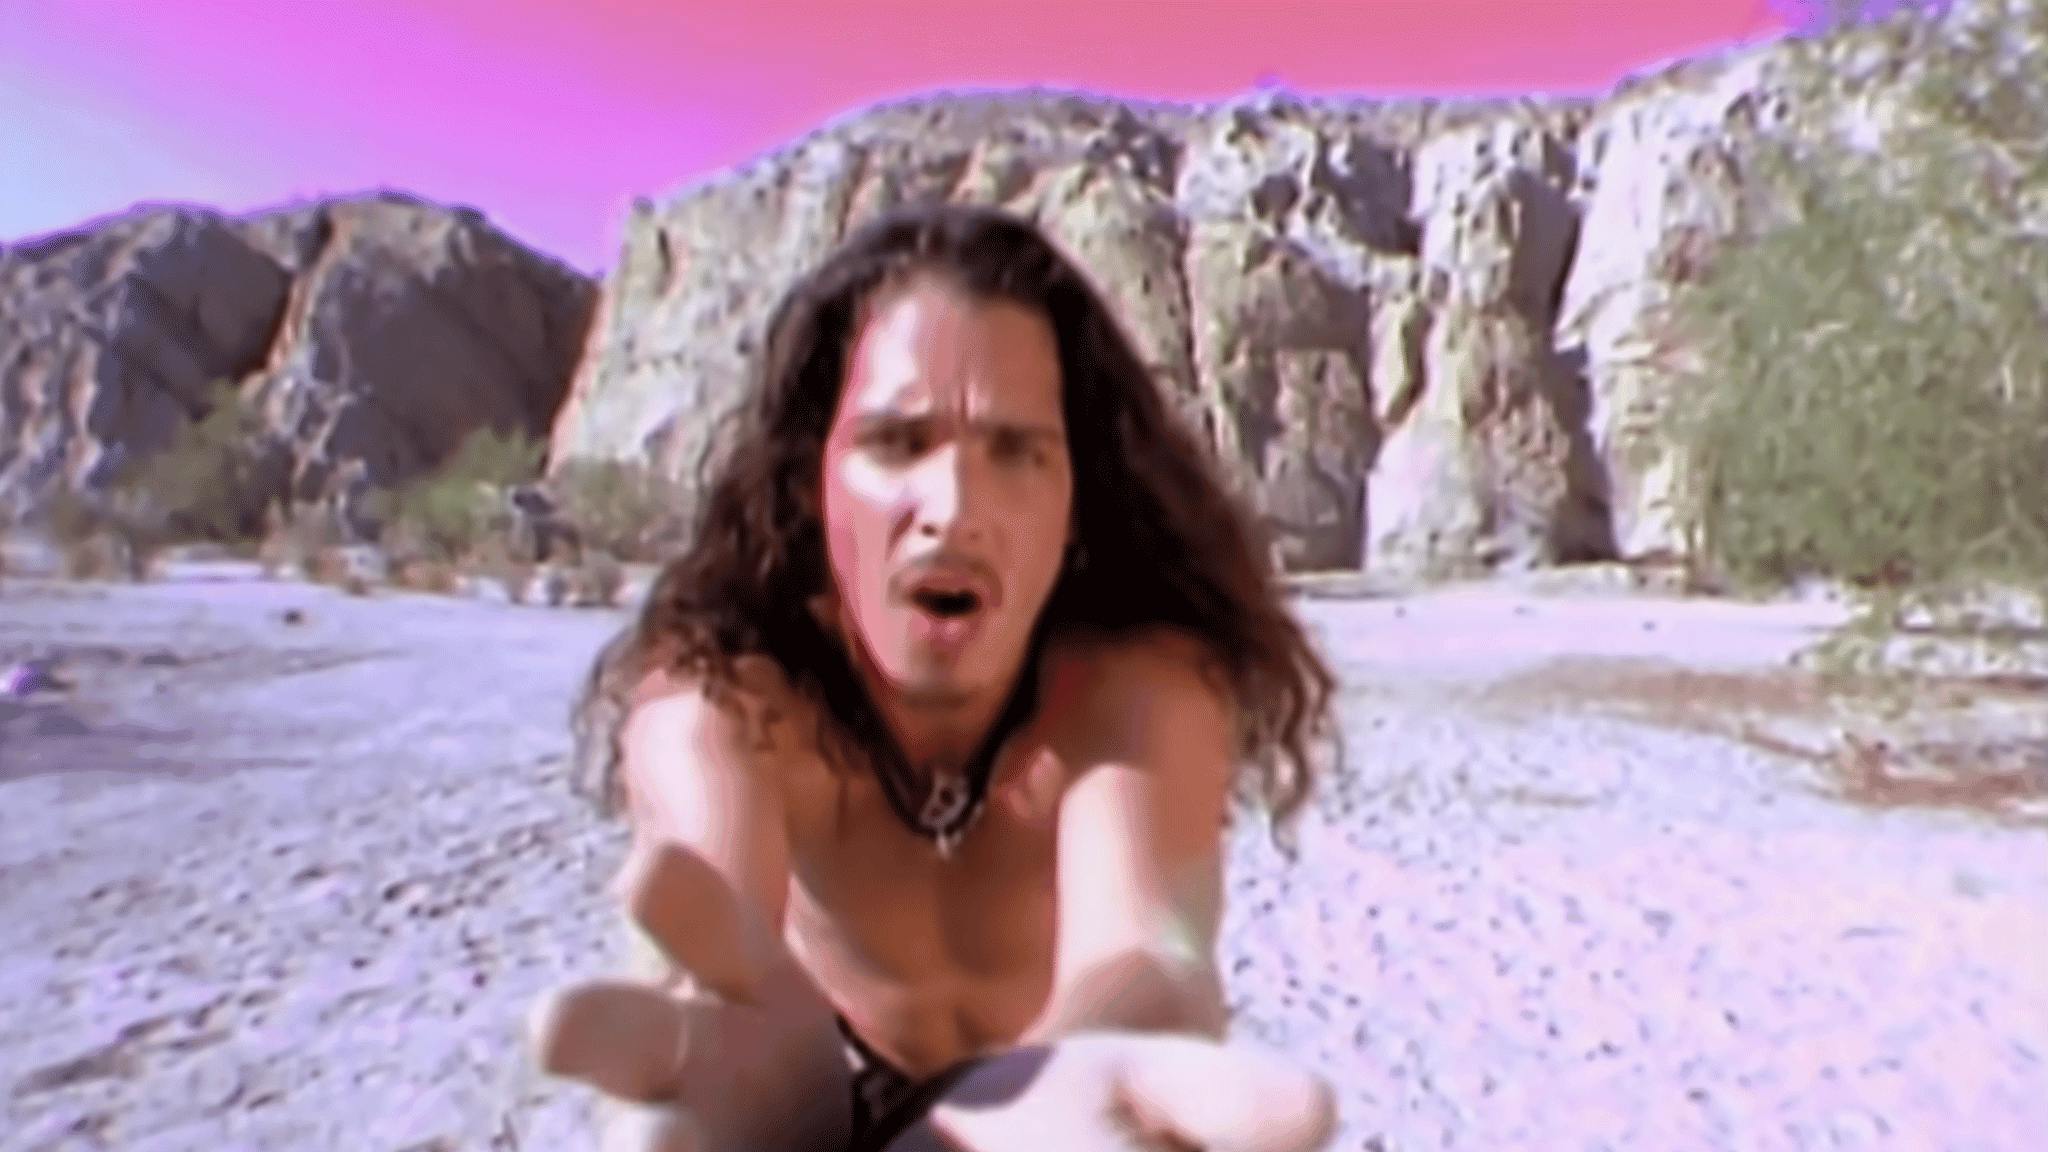 12 of the most controversial rock music videos ever